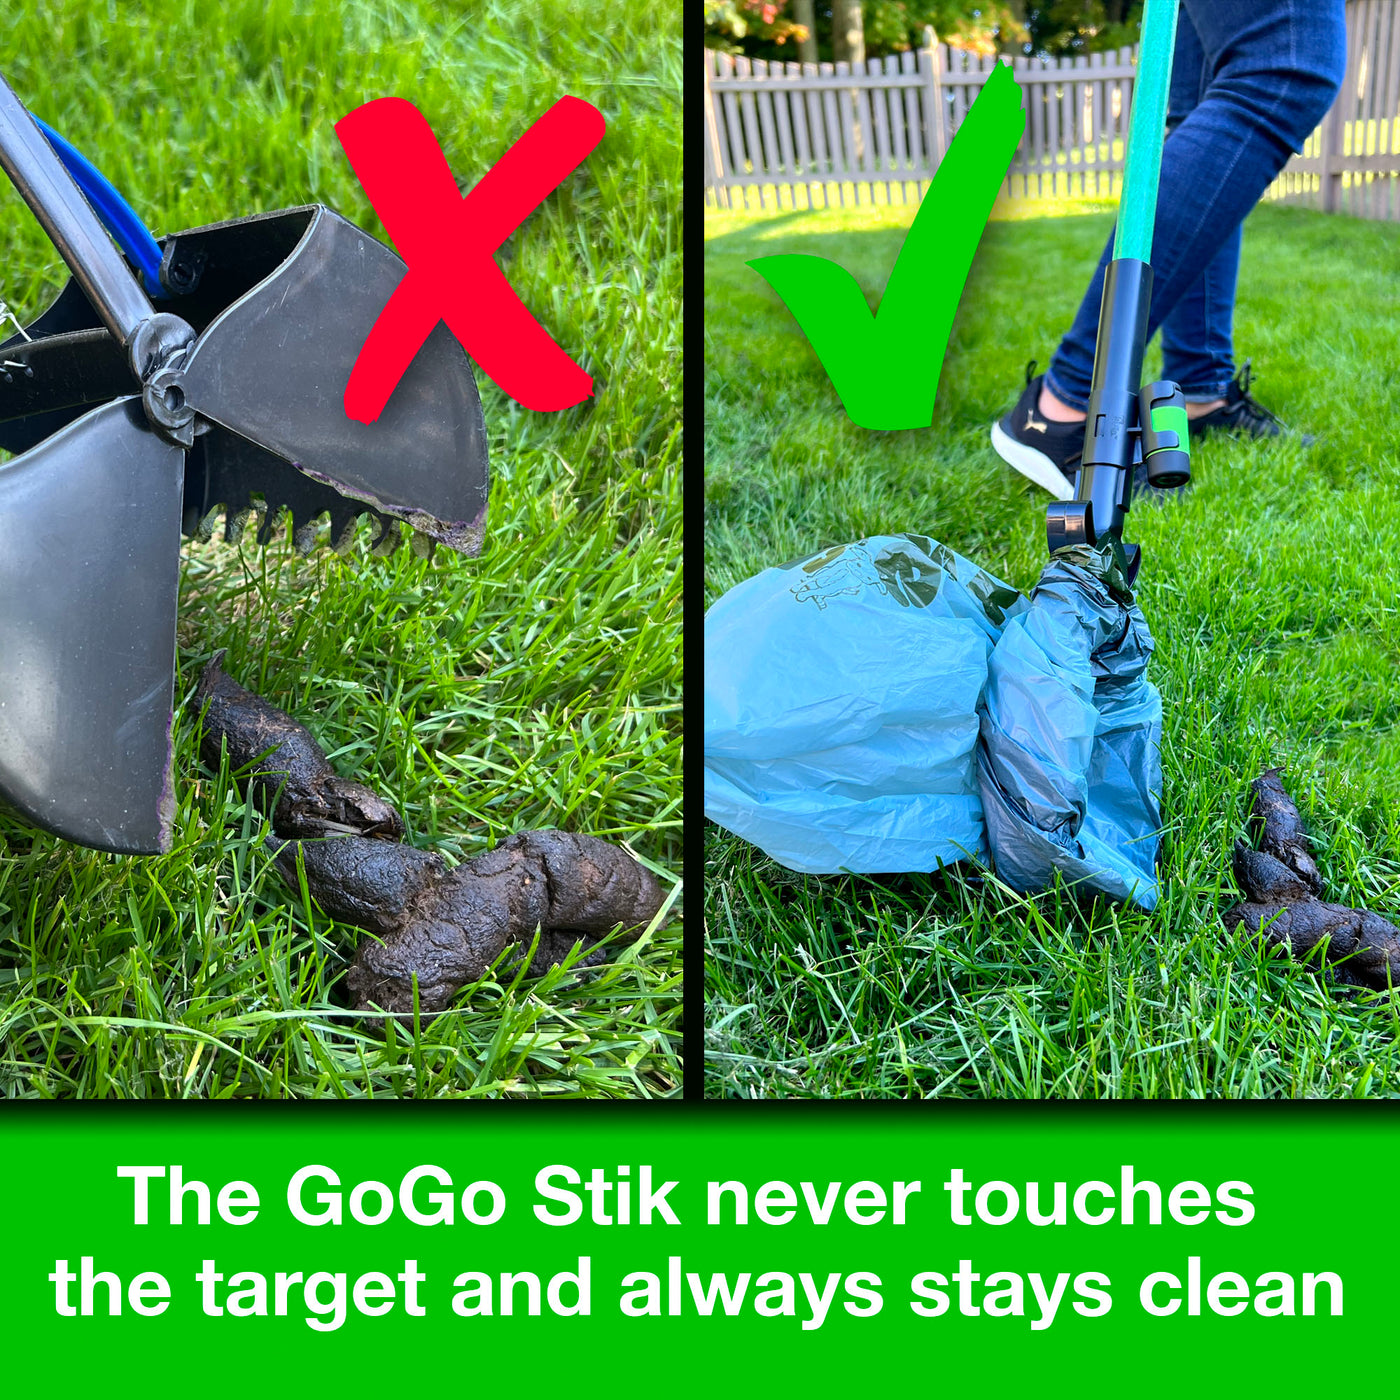 GoGo Stik® Totally Clean Pooper Scooper and Dootie Rake Set. Strong Adjustable Aluminum Handles. Small to Large Dogs. Hands Clean Scooping on Grass, Gravel or Indoors. Use Store Bags or Dootie Bags.